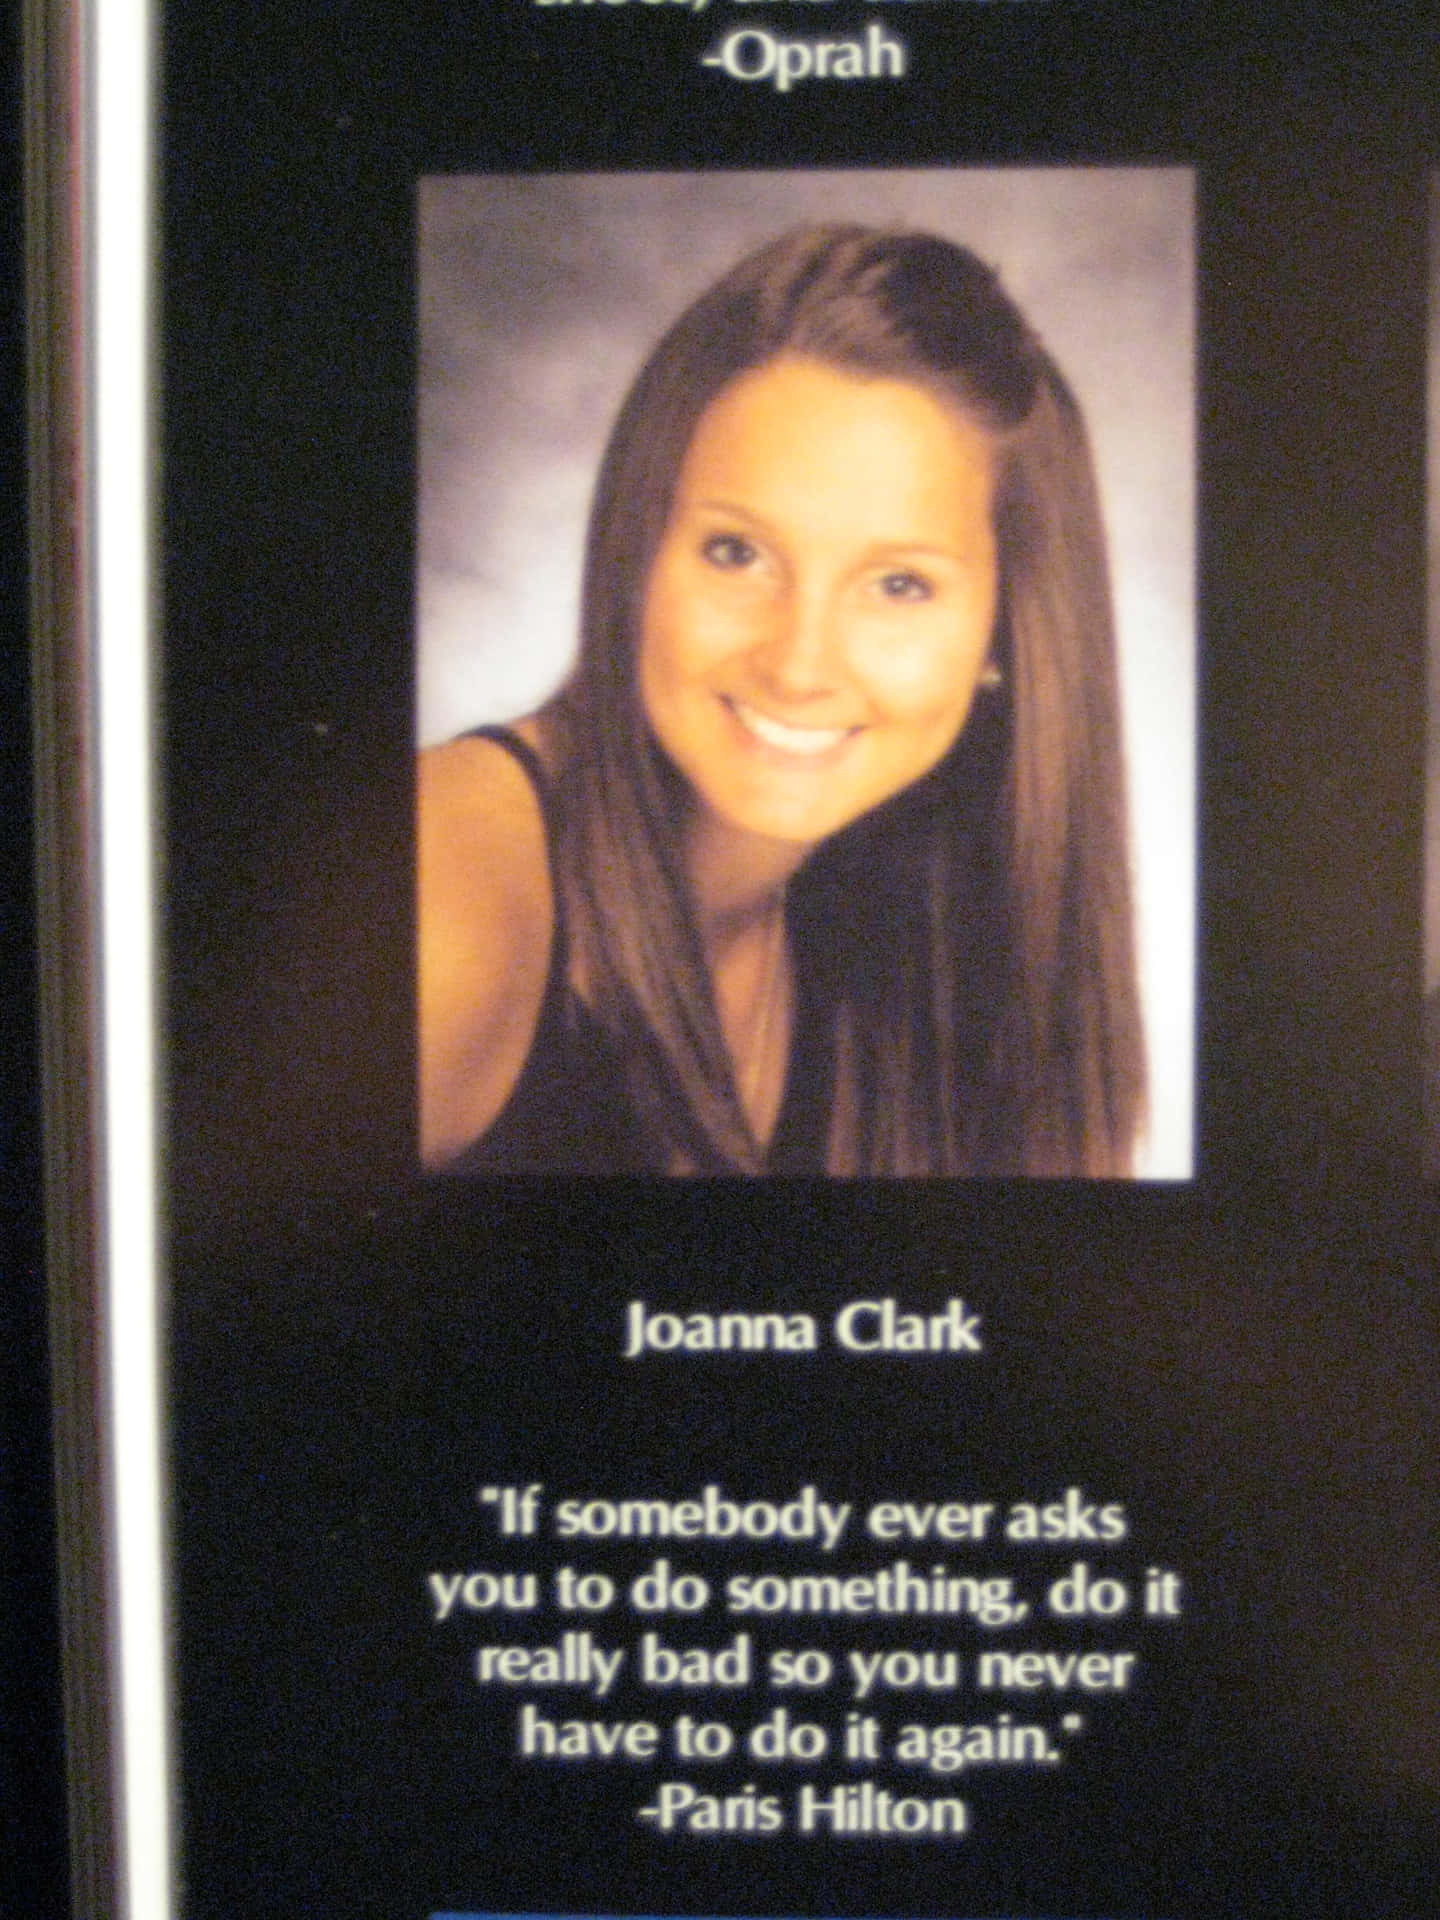 Let's make this senior yearbook moment last forever